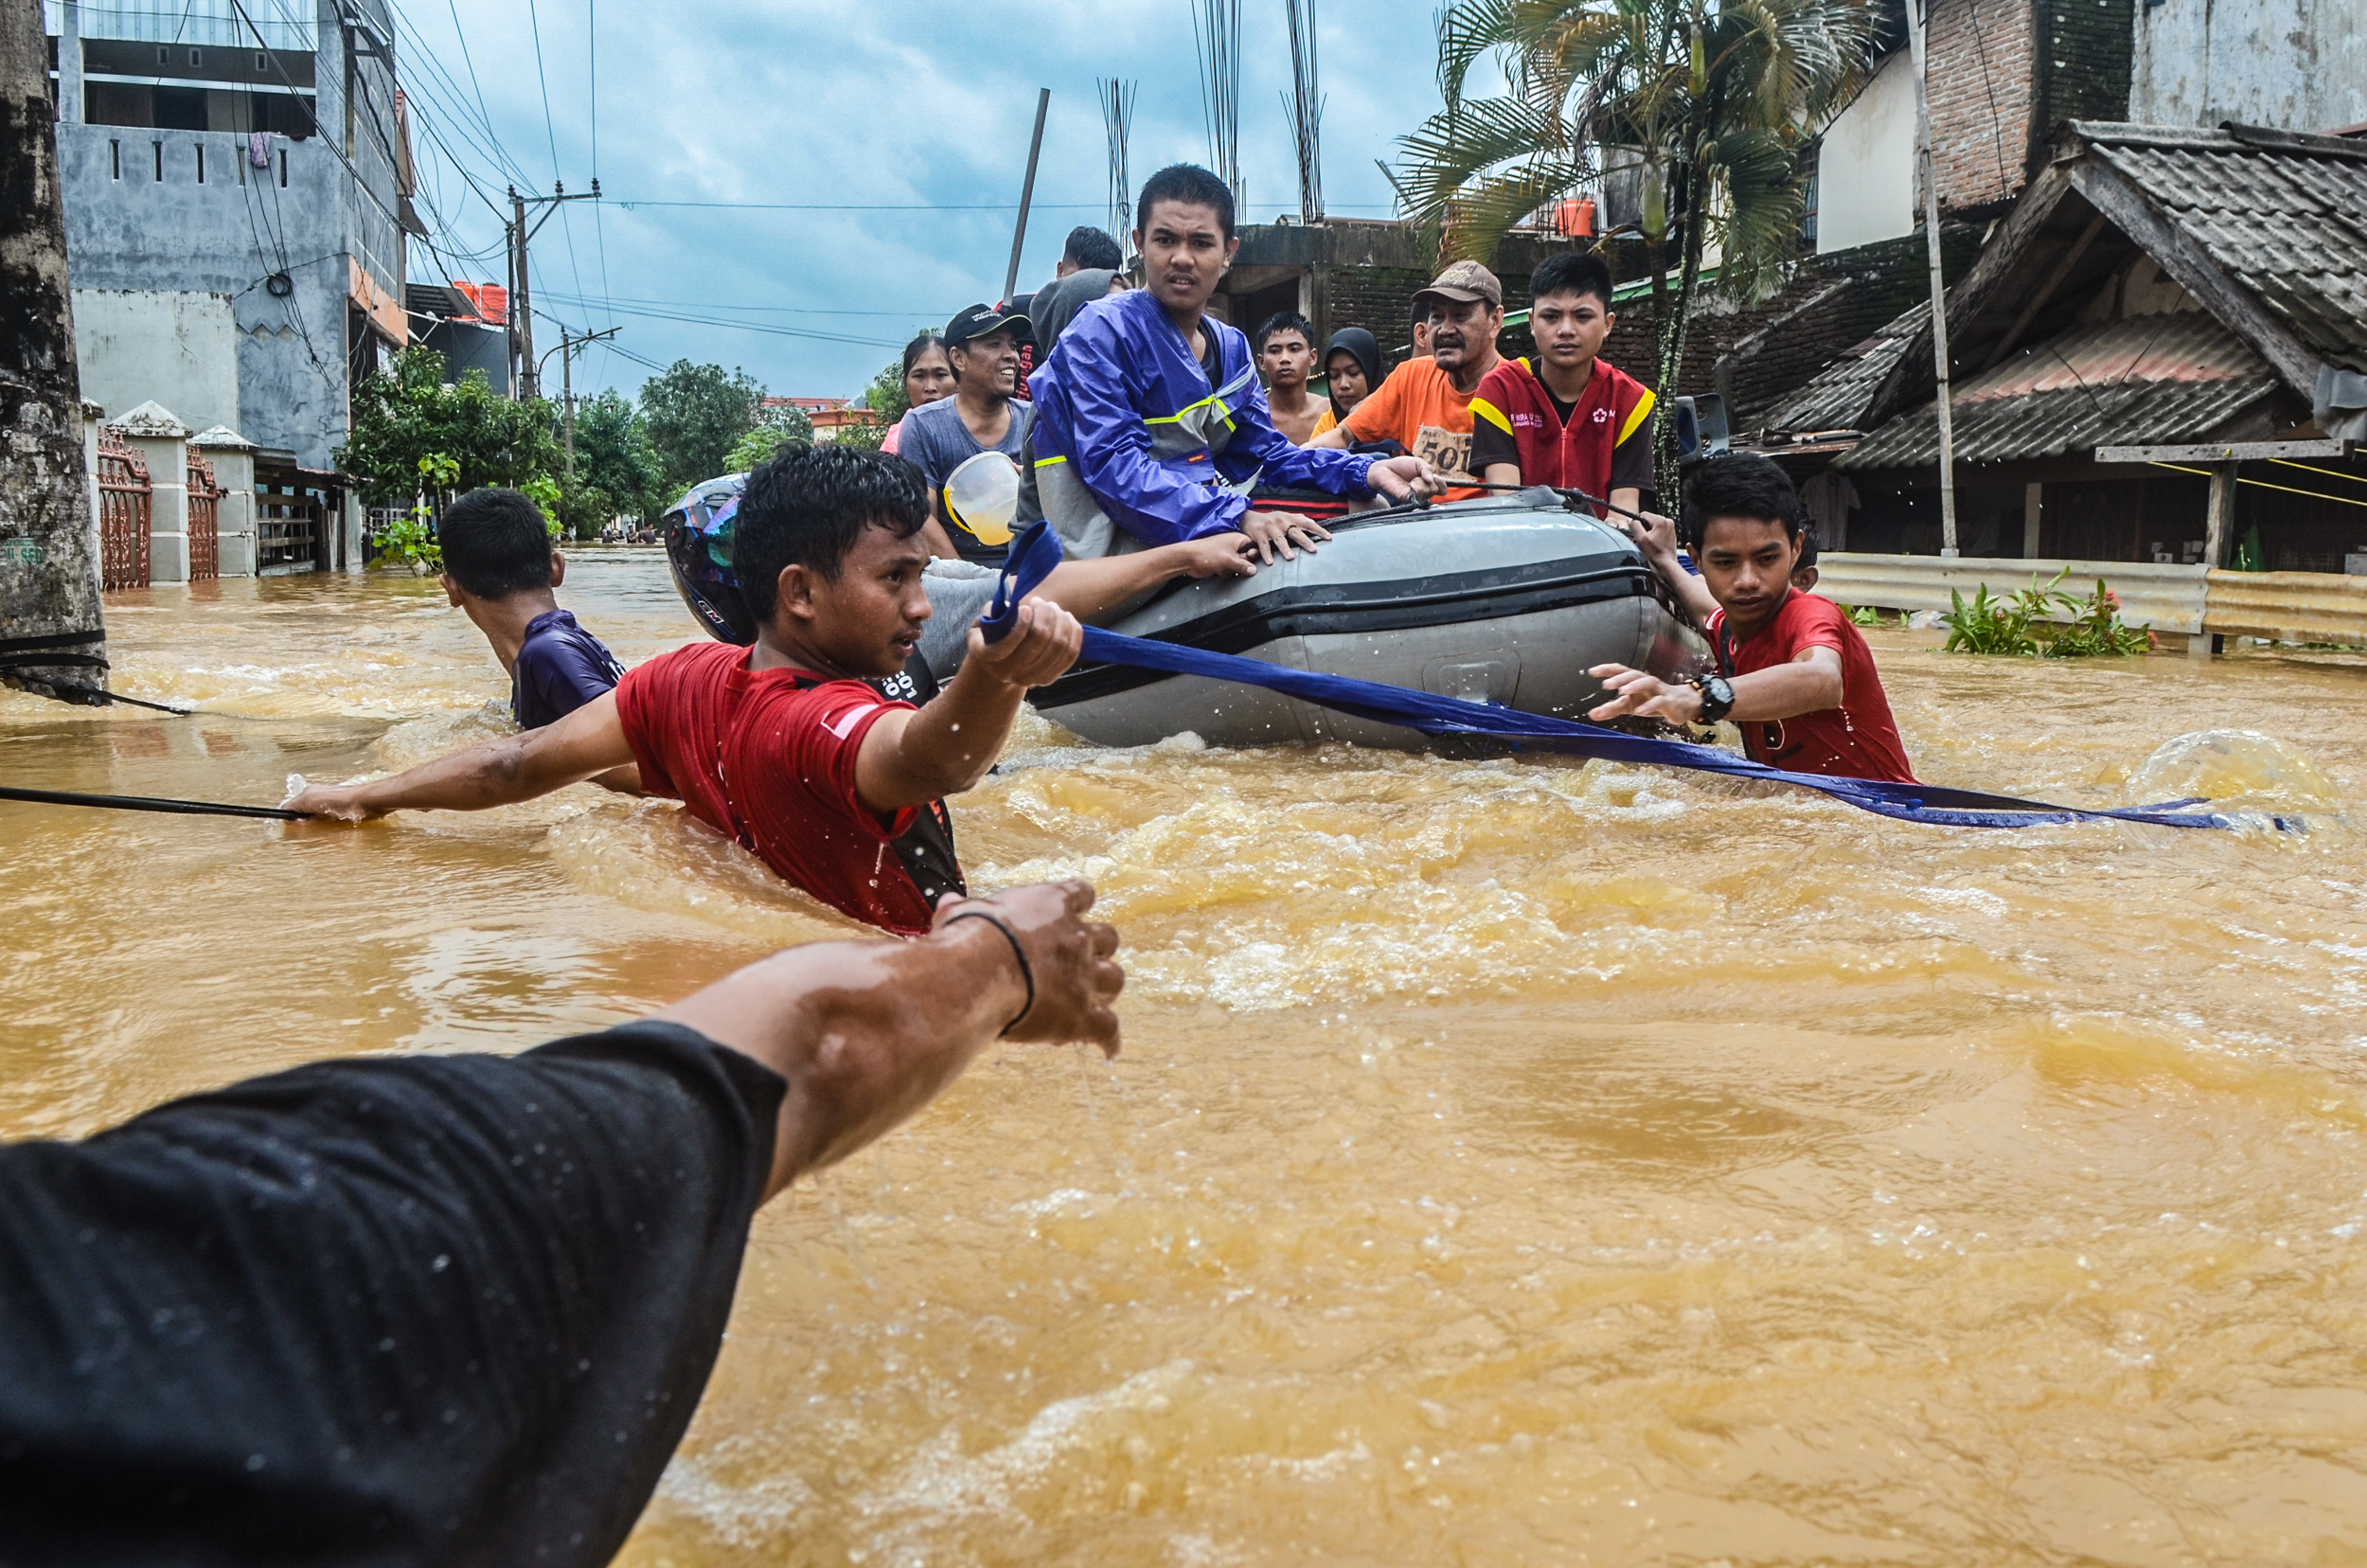 <p>Rescuers evacuate people from their flooded houses in South Sulawesi province, Indonesia, in 2019 (Image © Greenpeace / Sahrul Manda Tikupadang)</p>